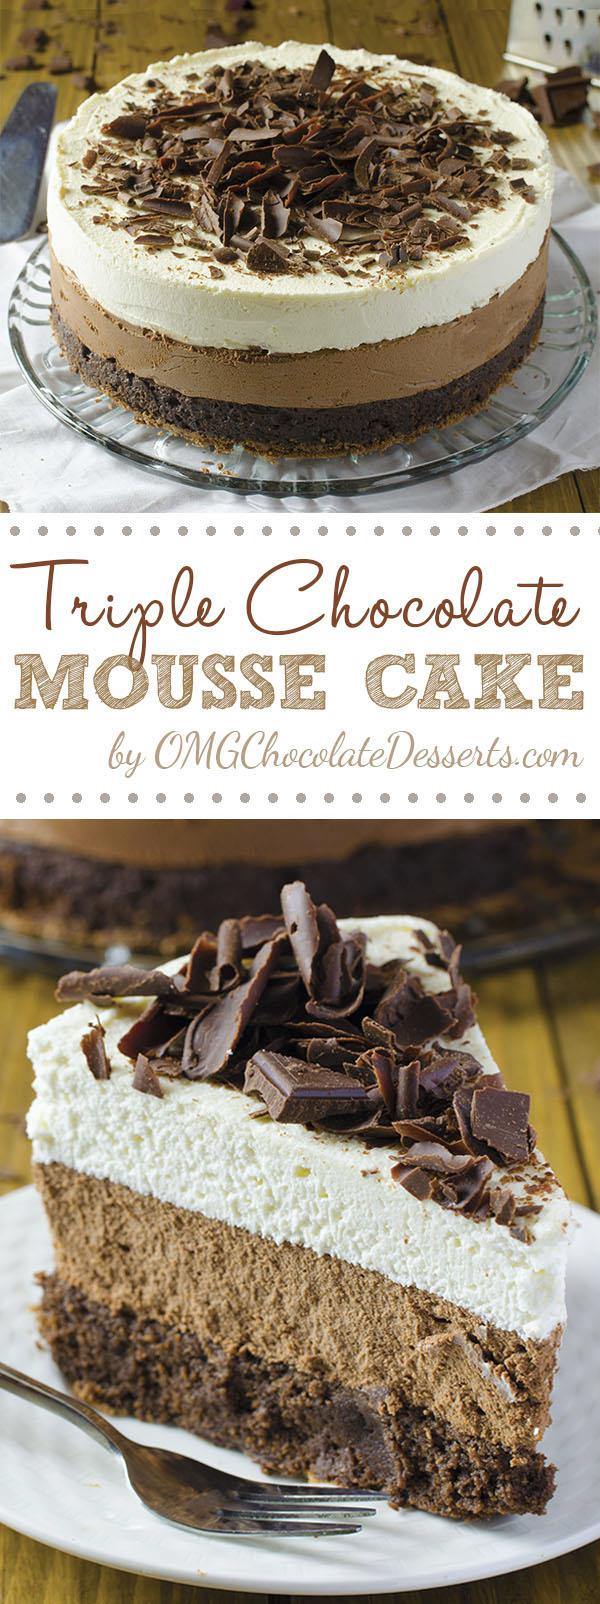 One of the most decadent chocolate cakes ever – Triple Chocolate Mousse Cake